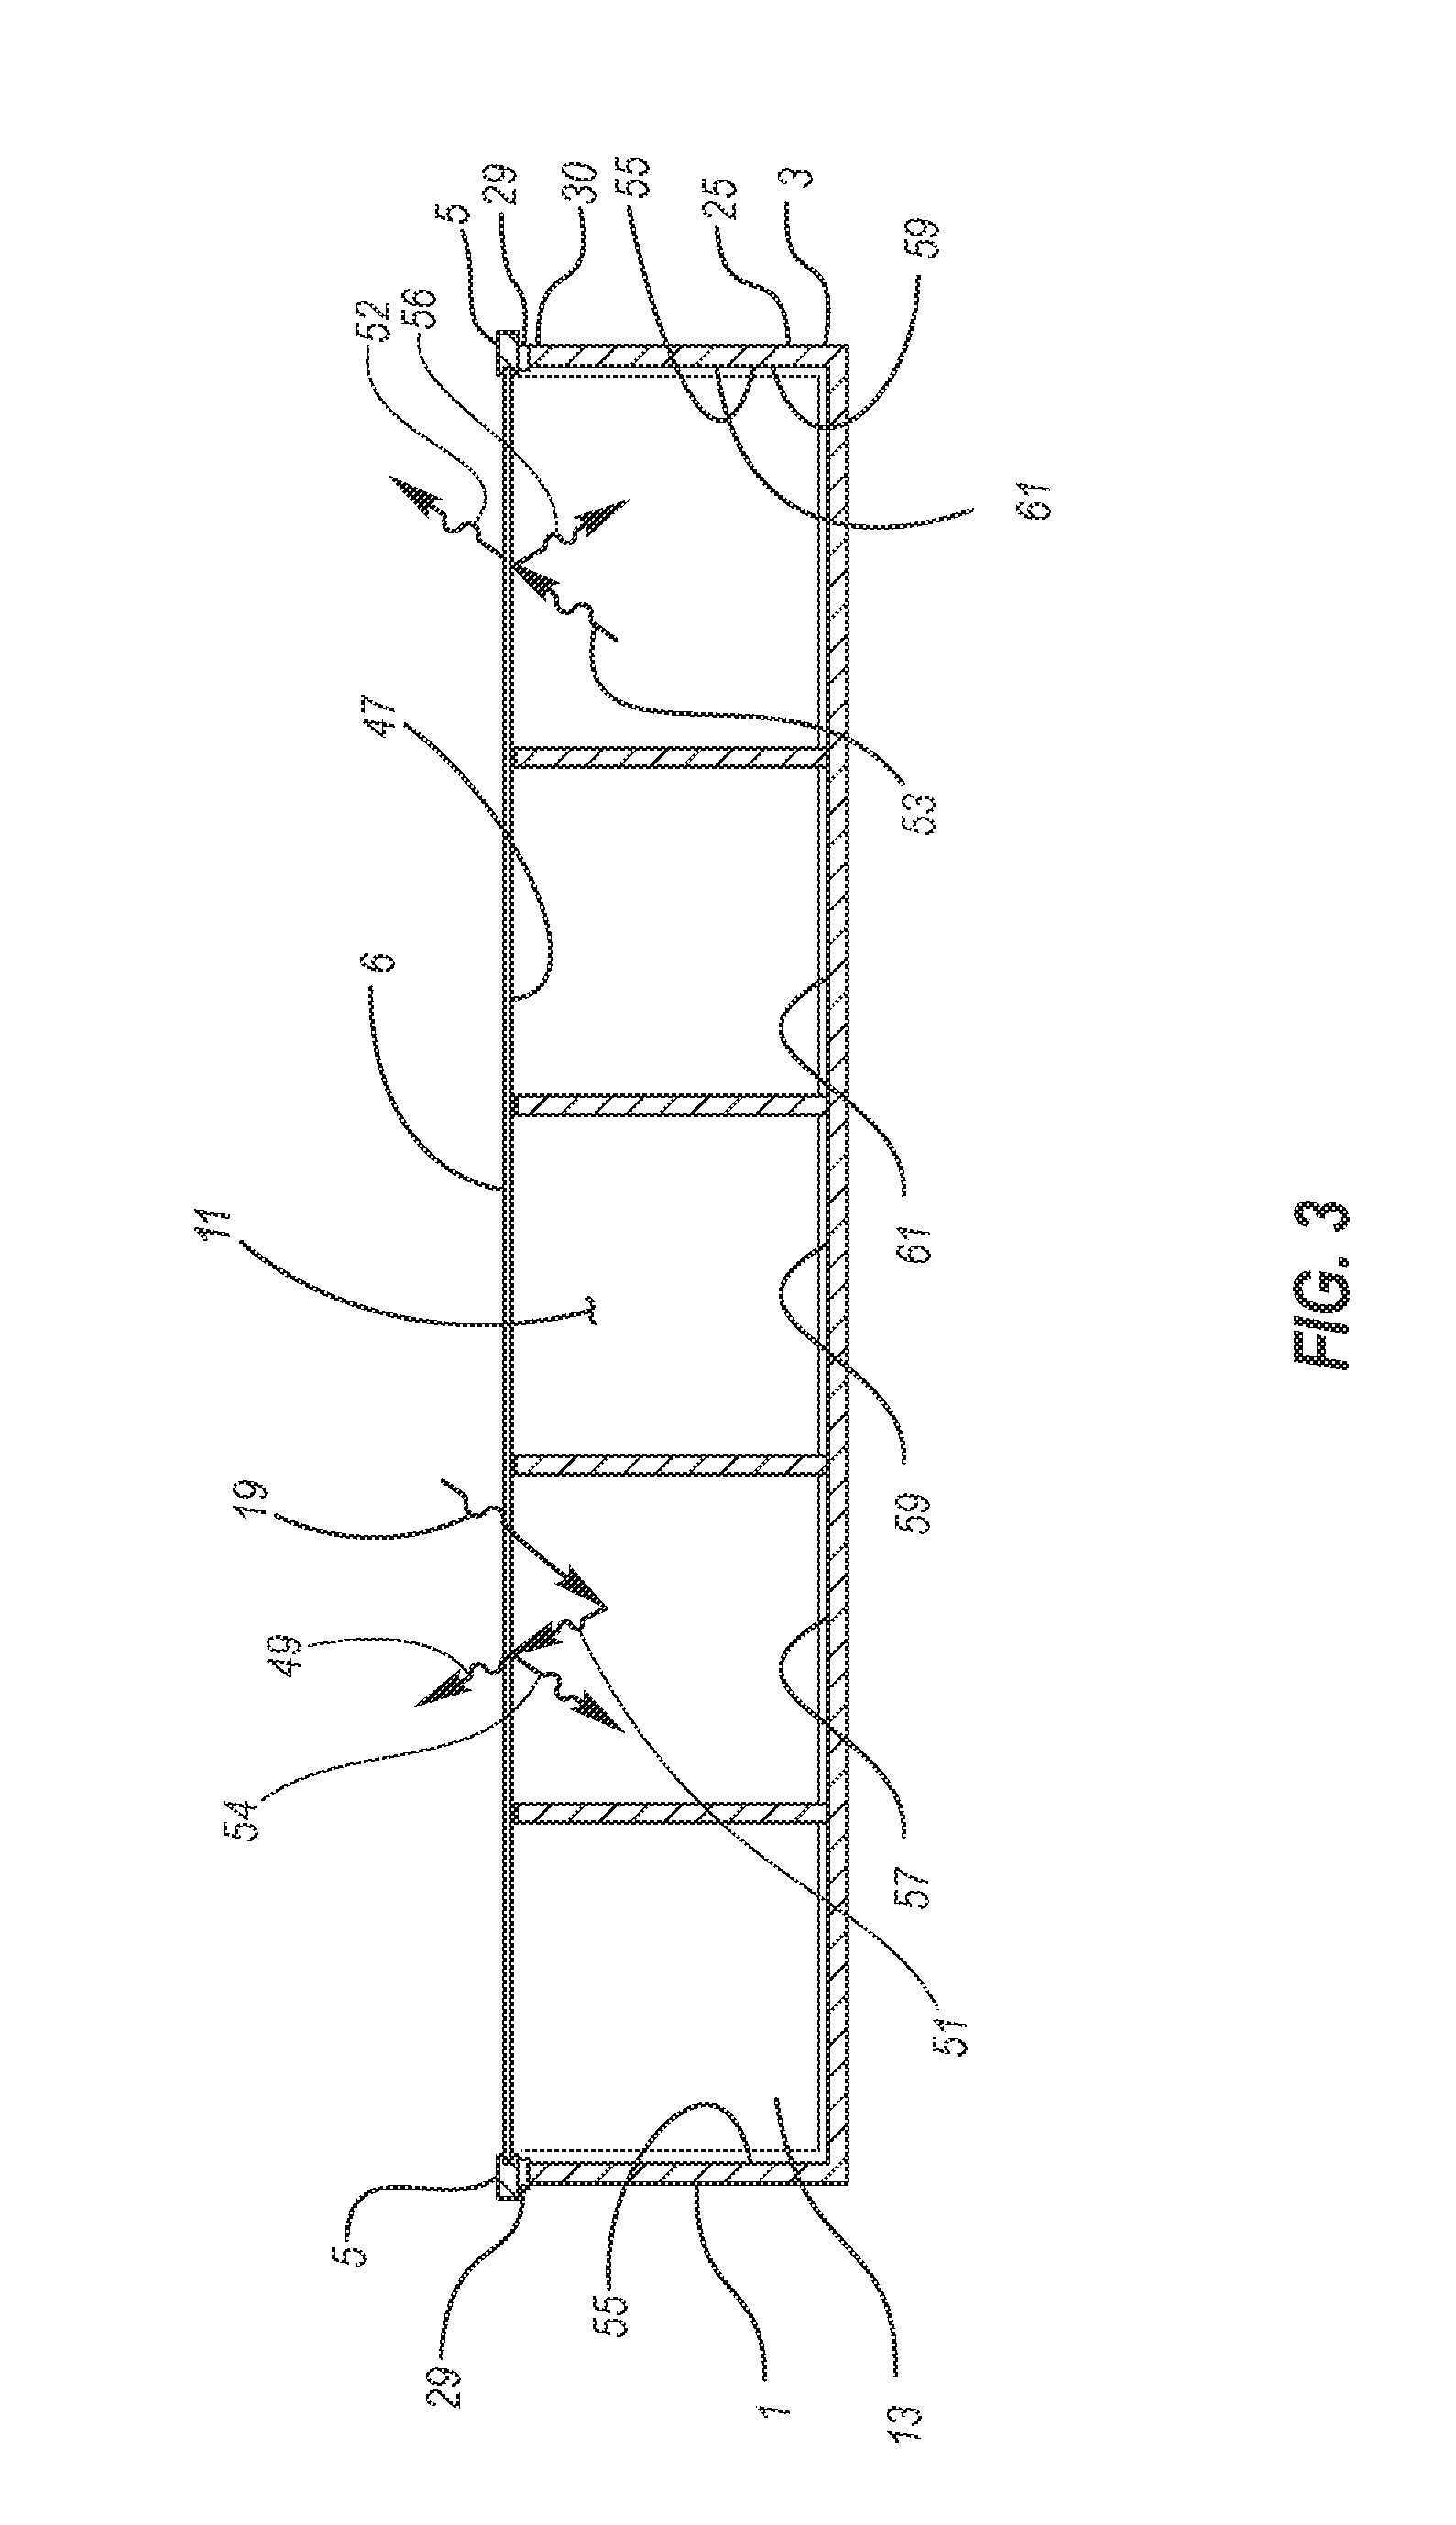 Solar receiver with direct absorption media irradiation